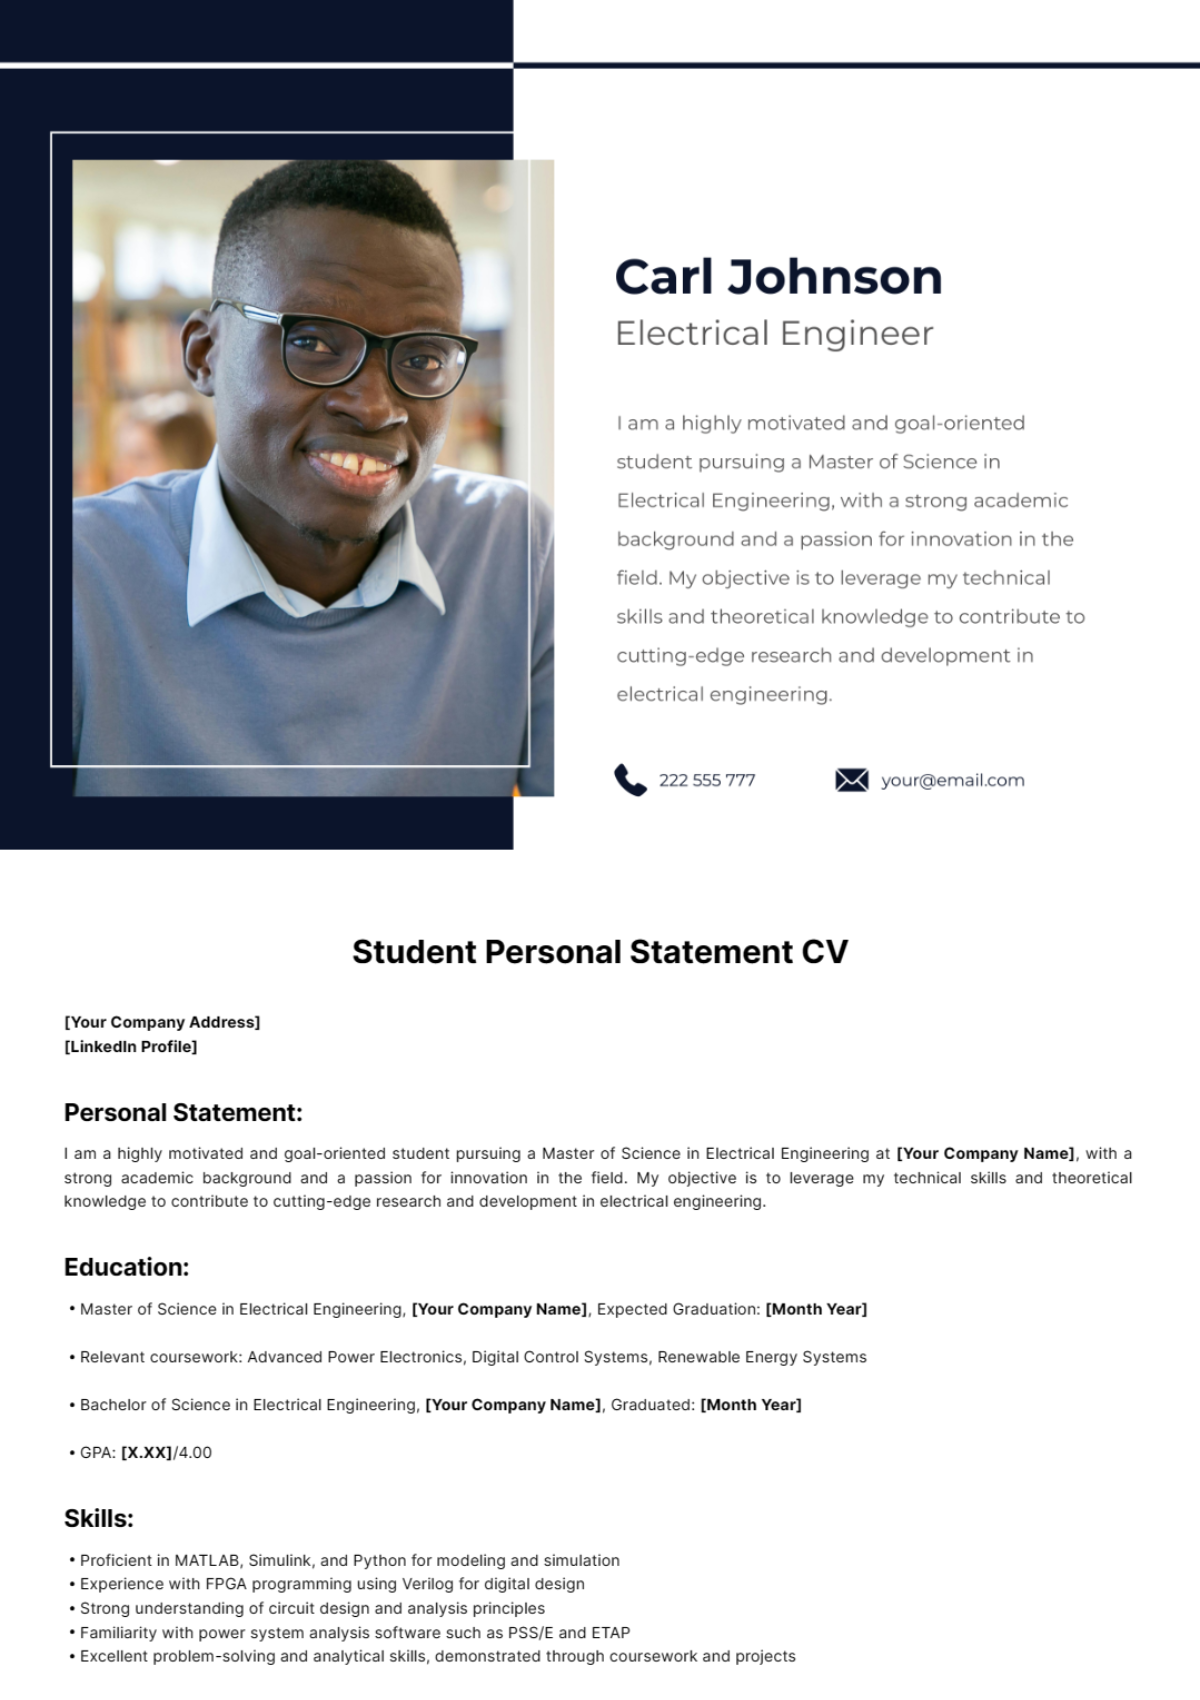 Free Student Personal Statement CV Template